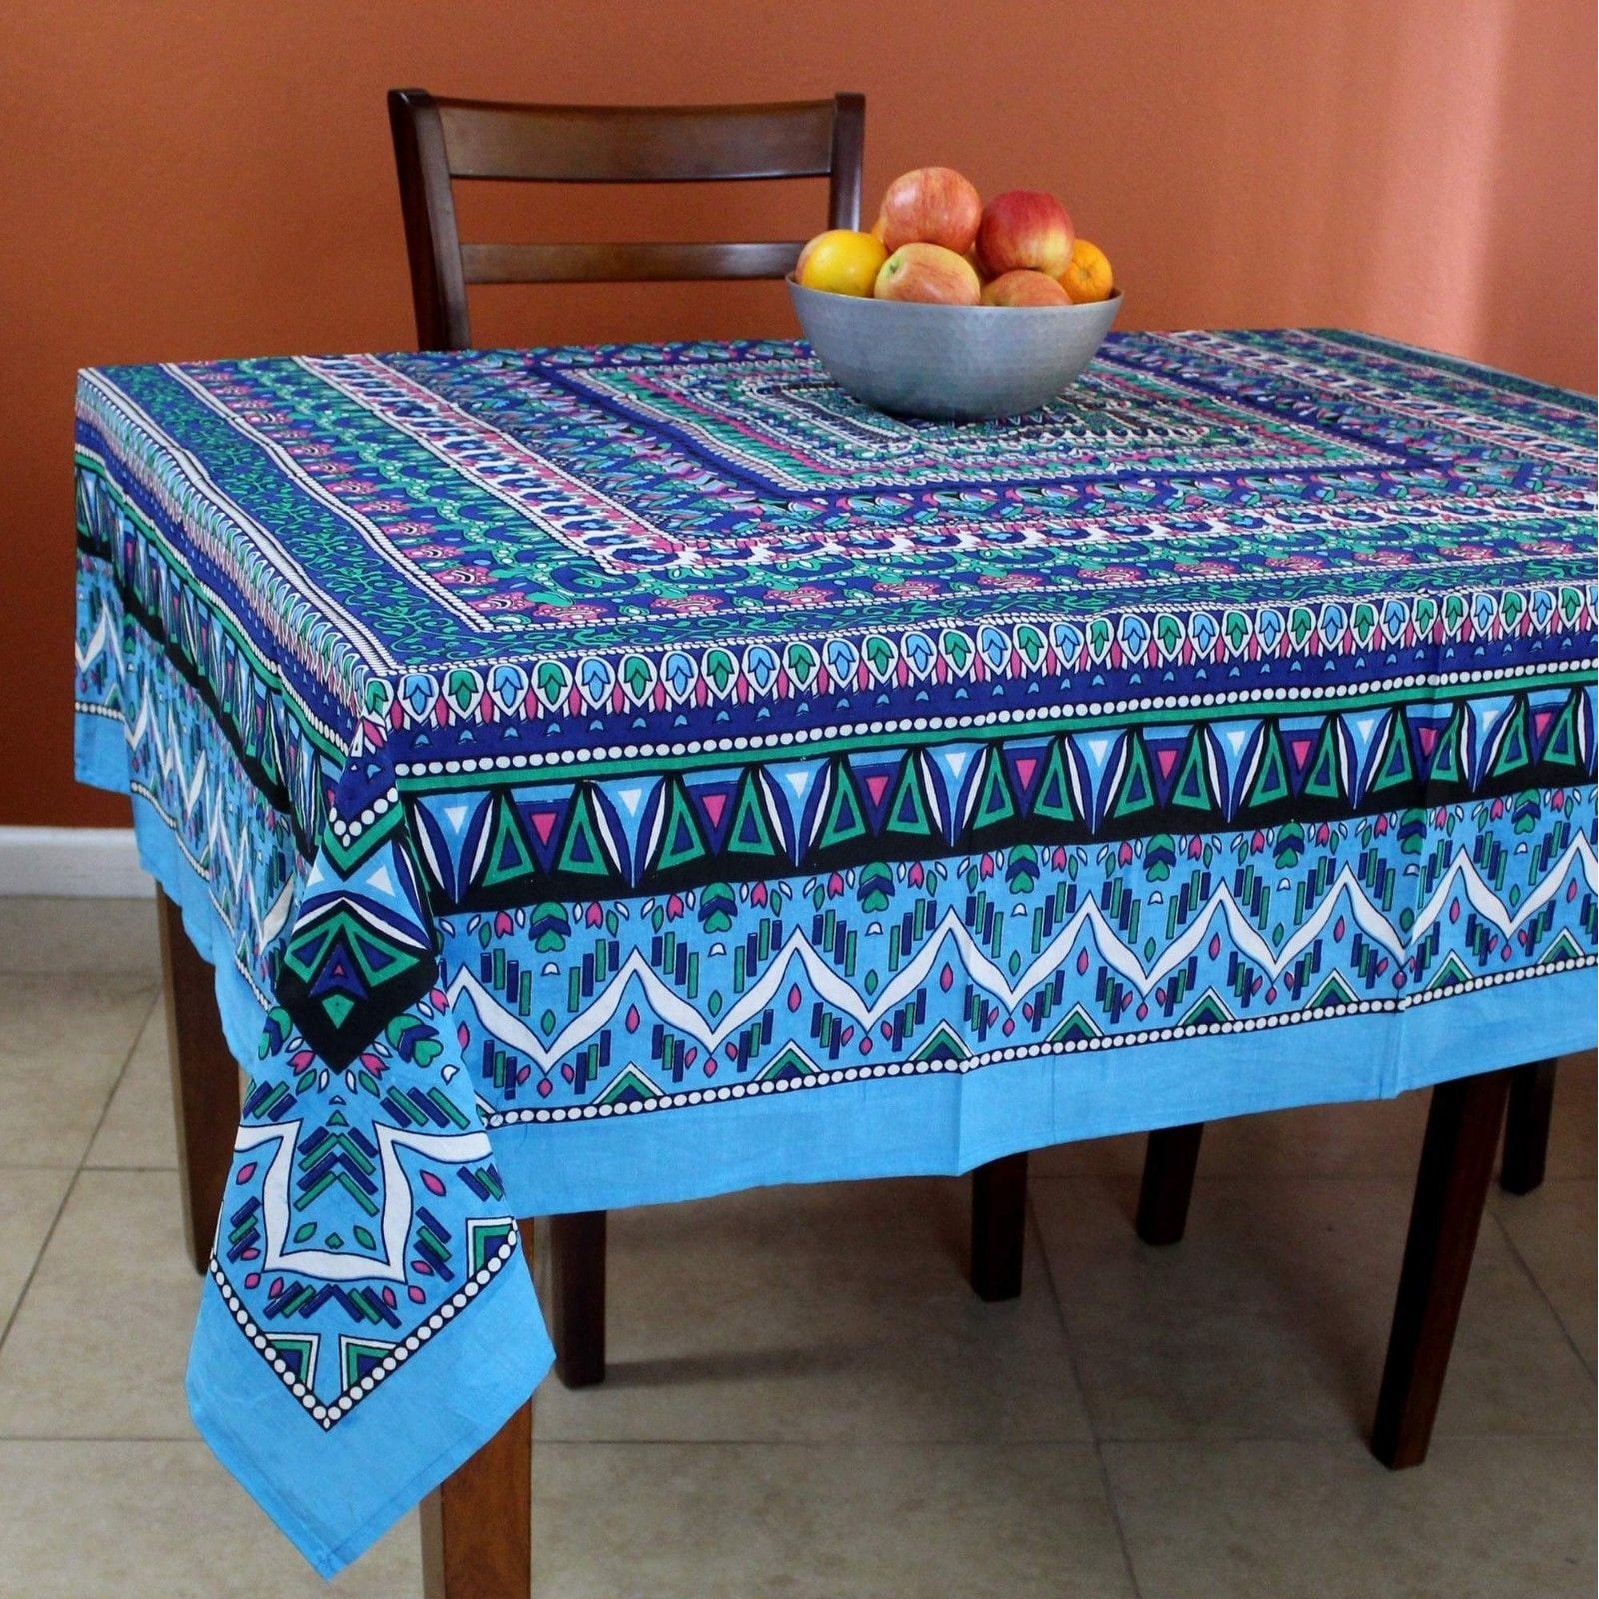 Continuous Oriental Mediterranean Sea Colors Inspired Pattern Ambesonne Moroccan Tablecloth Dining Room Kitchen Rectangular Table Cover 60 X 84 Indigo Cadet Blue and White 